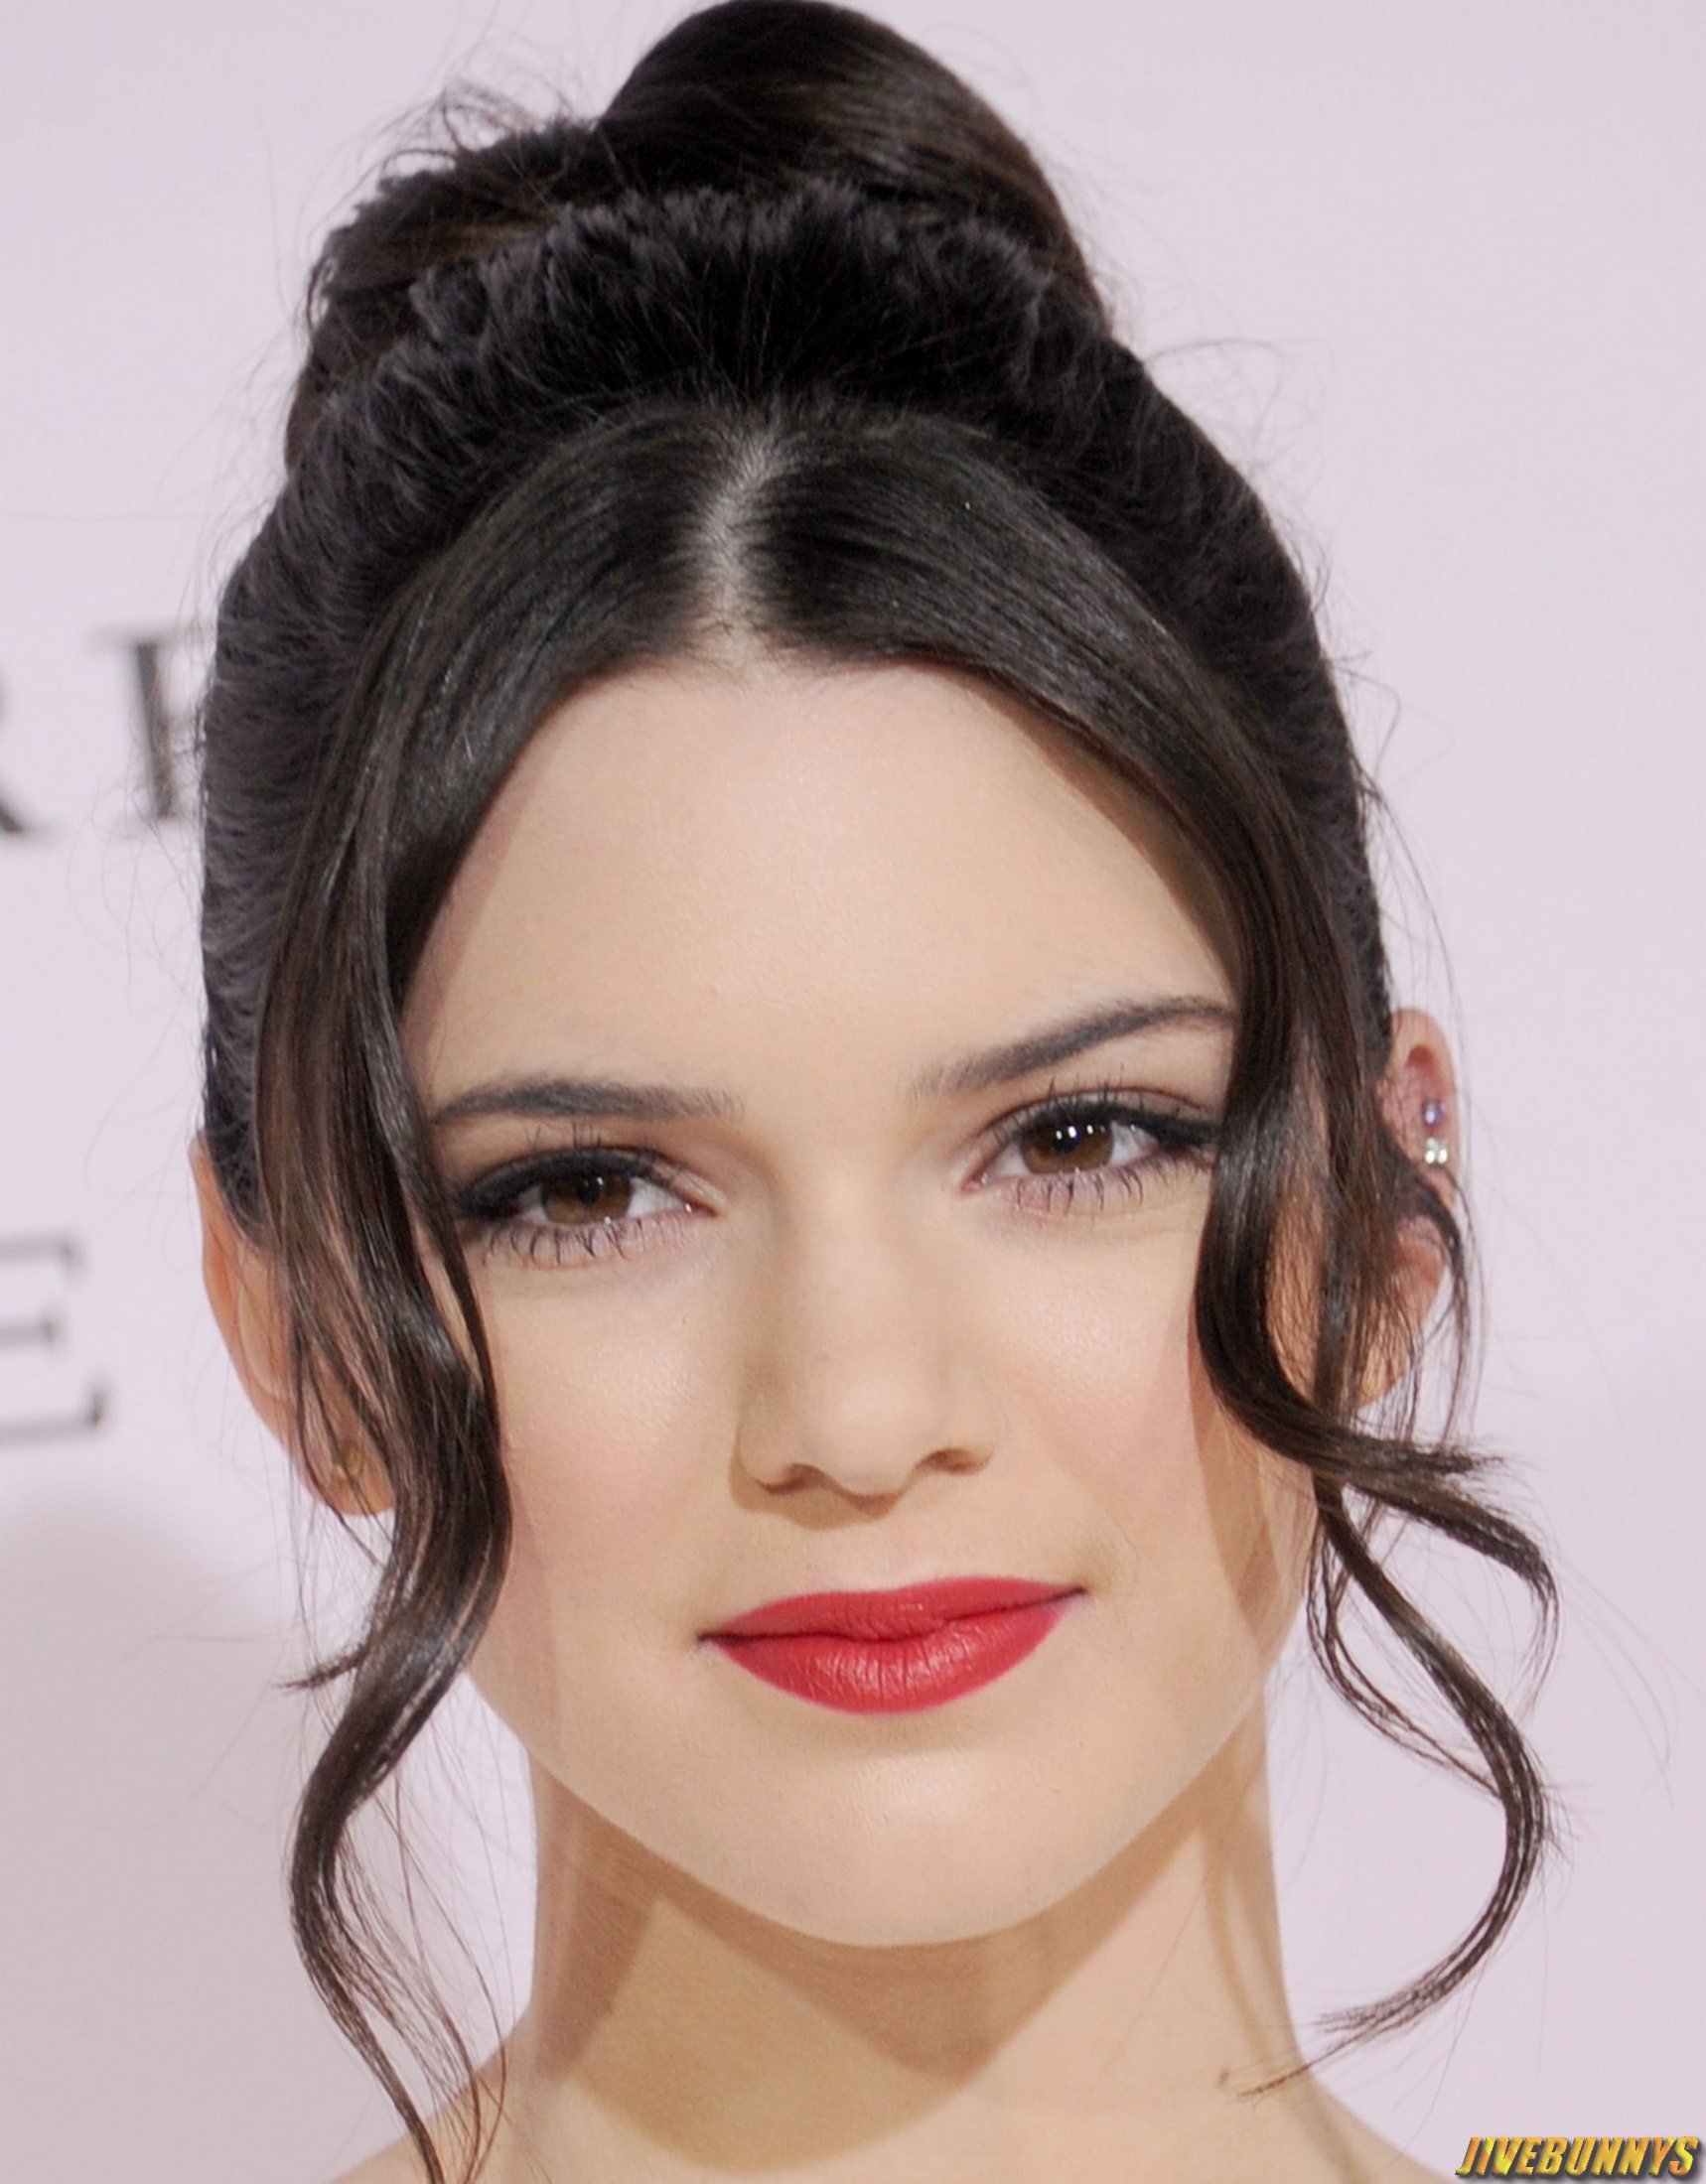 General photo of Kendall Jenner